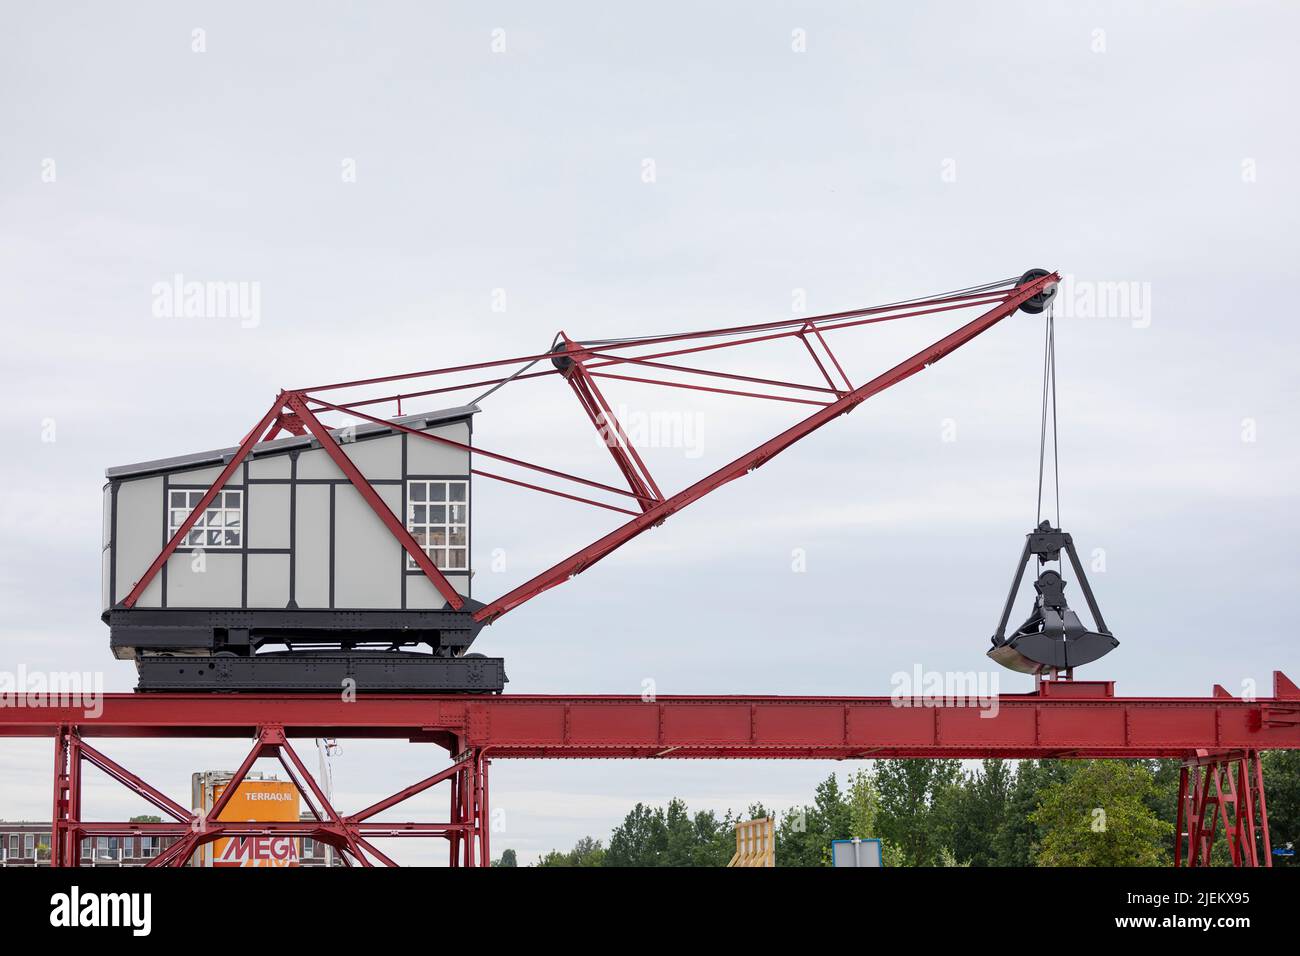 Old crane at former factory along the Helmond canal in the Netherlands Stock Photo